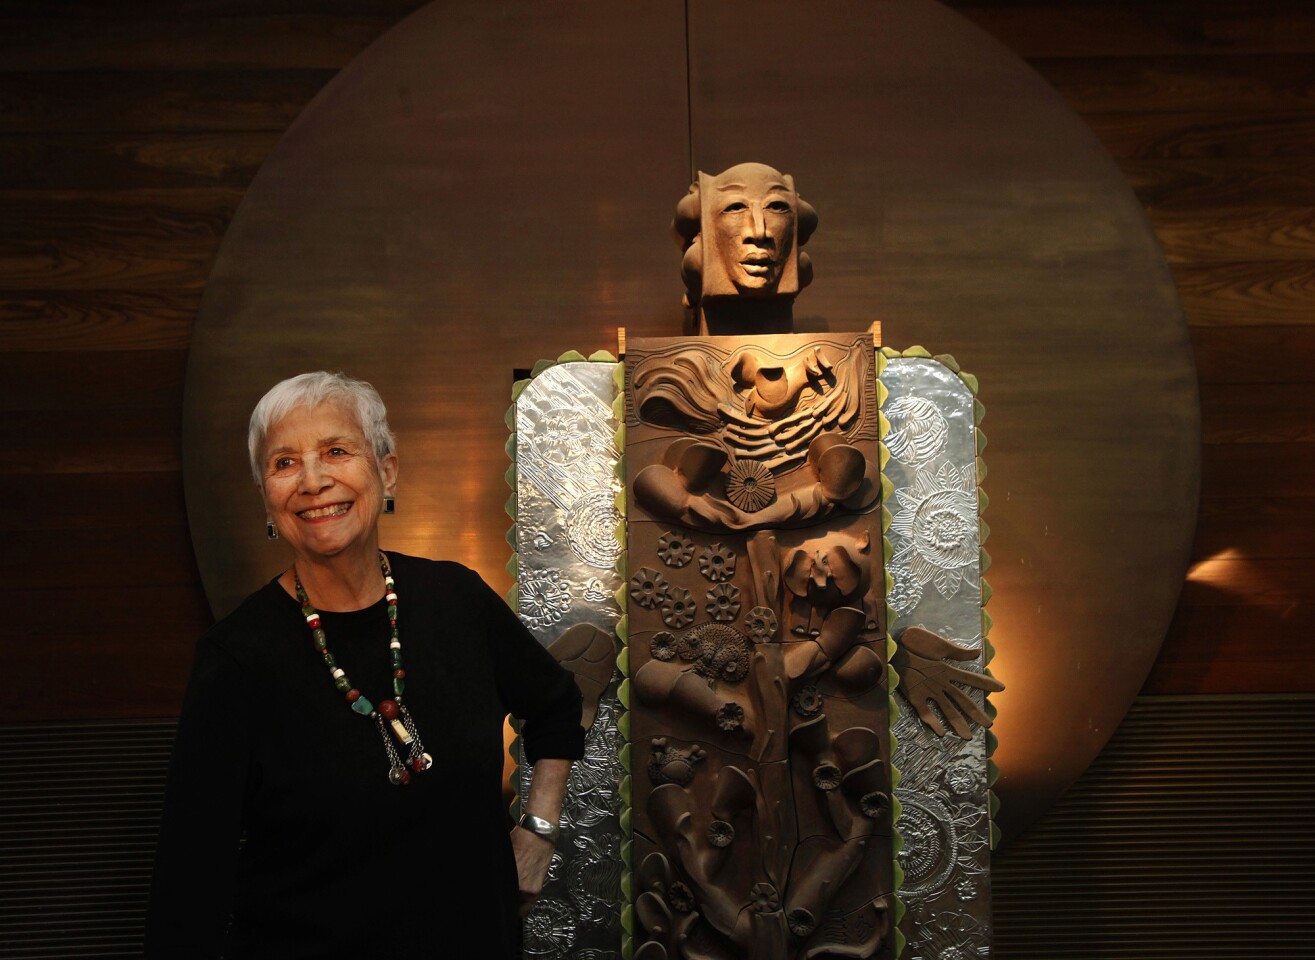 Ceramic artist Dora De Larios, 81, stands next to her piece, "Earth Goddess," at Irving Place Studio. Delarios is one of America's leading clay artists, with place settings for the White House and a grand concrete wall sculpture in Nagoya, Japan, among her accomplishments.